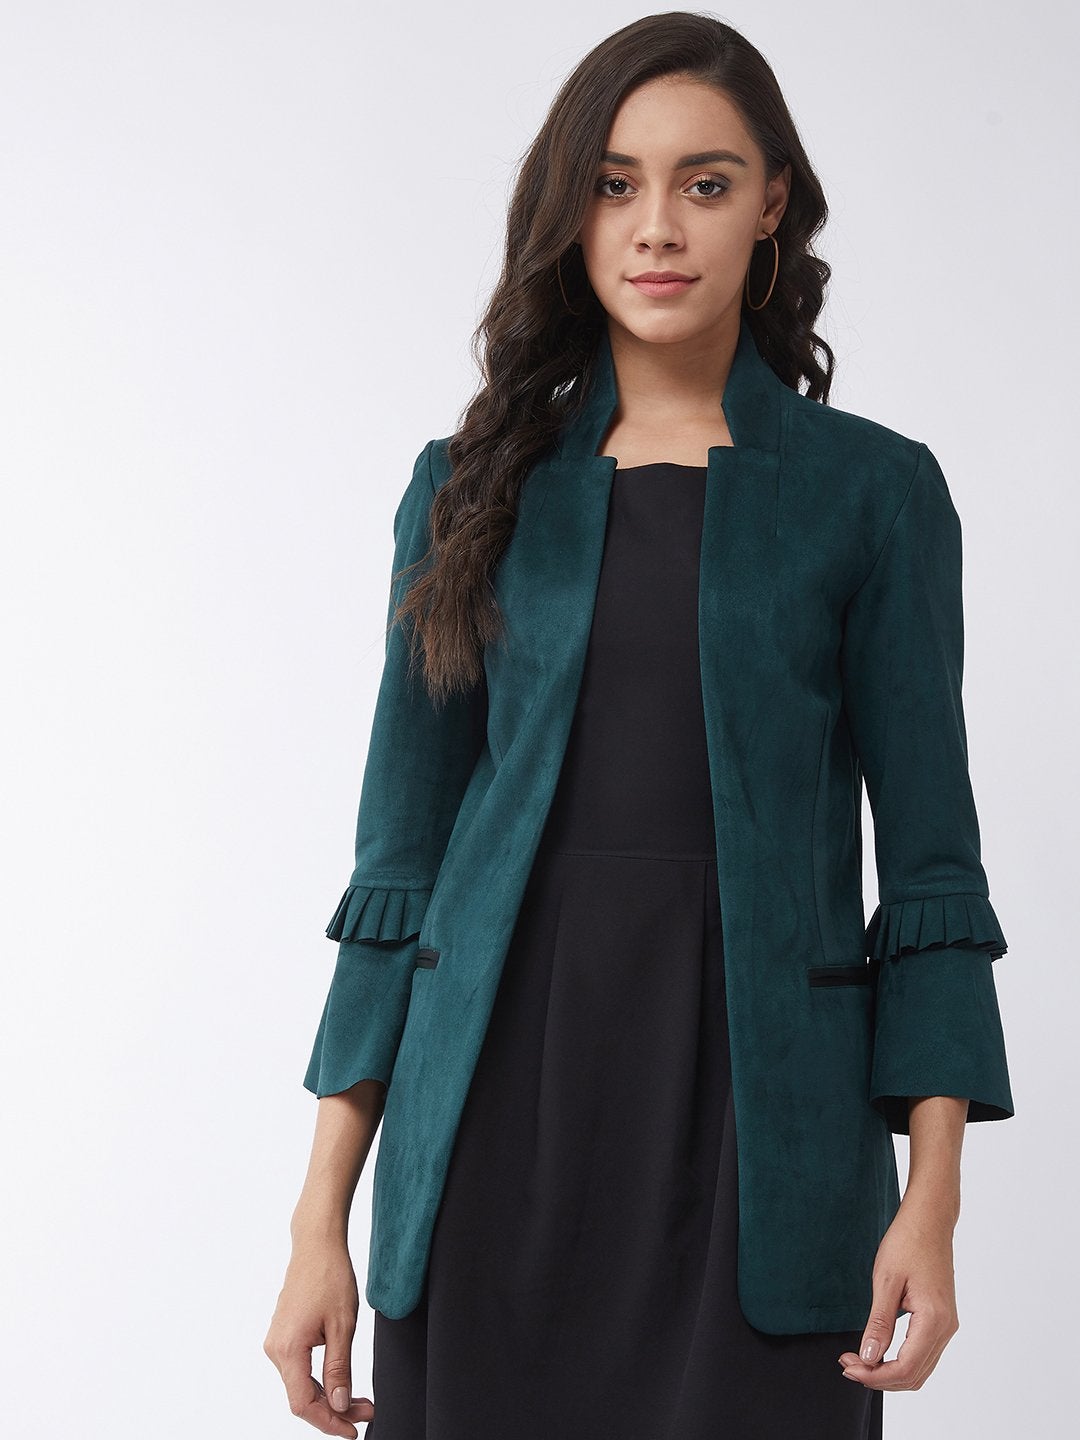 Women's Solid Blazer With Ruffle - Pannkh